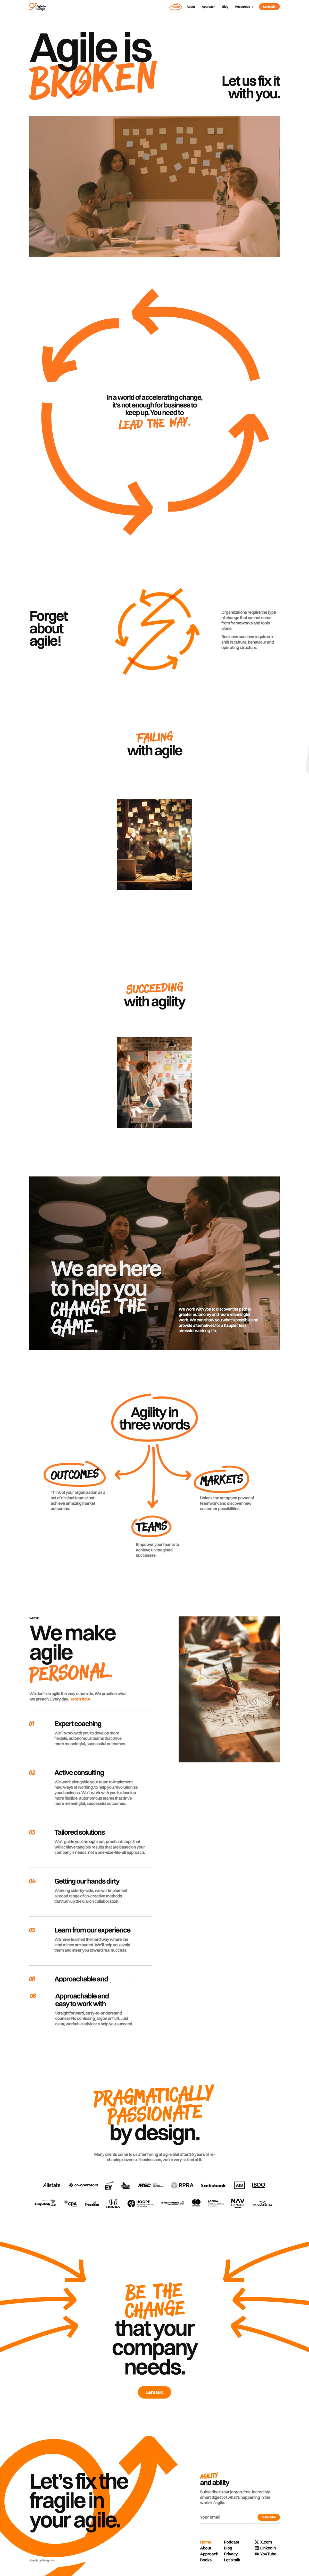 Agile By Design Landing Page Example: In a world of accelerating change, it’s not enough for business to keep up. You need to lead the way. We didn’t become experts overnight. Each of us has celebrated triumph and learned from losses. We’ve gained valuable lessons from every experience. What we’ve learned shapes our counsel and our guidance.